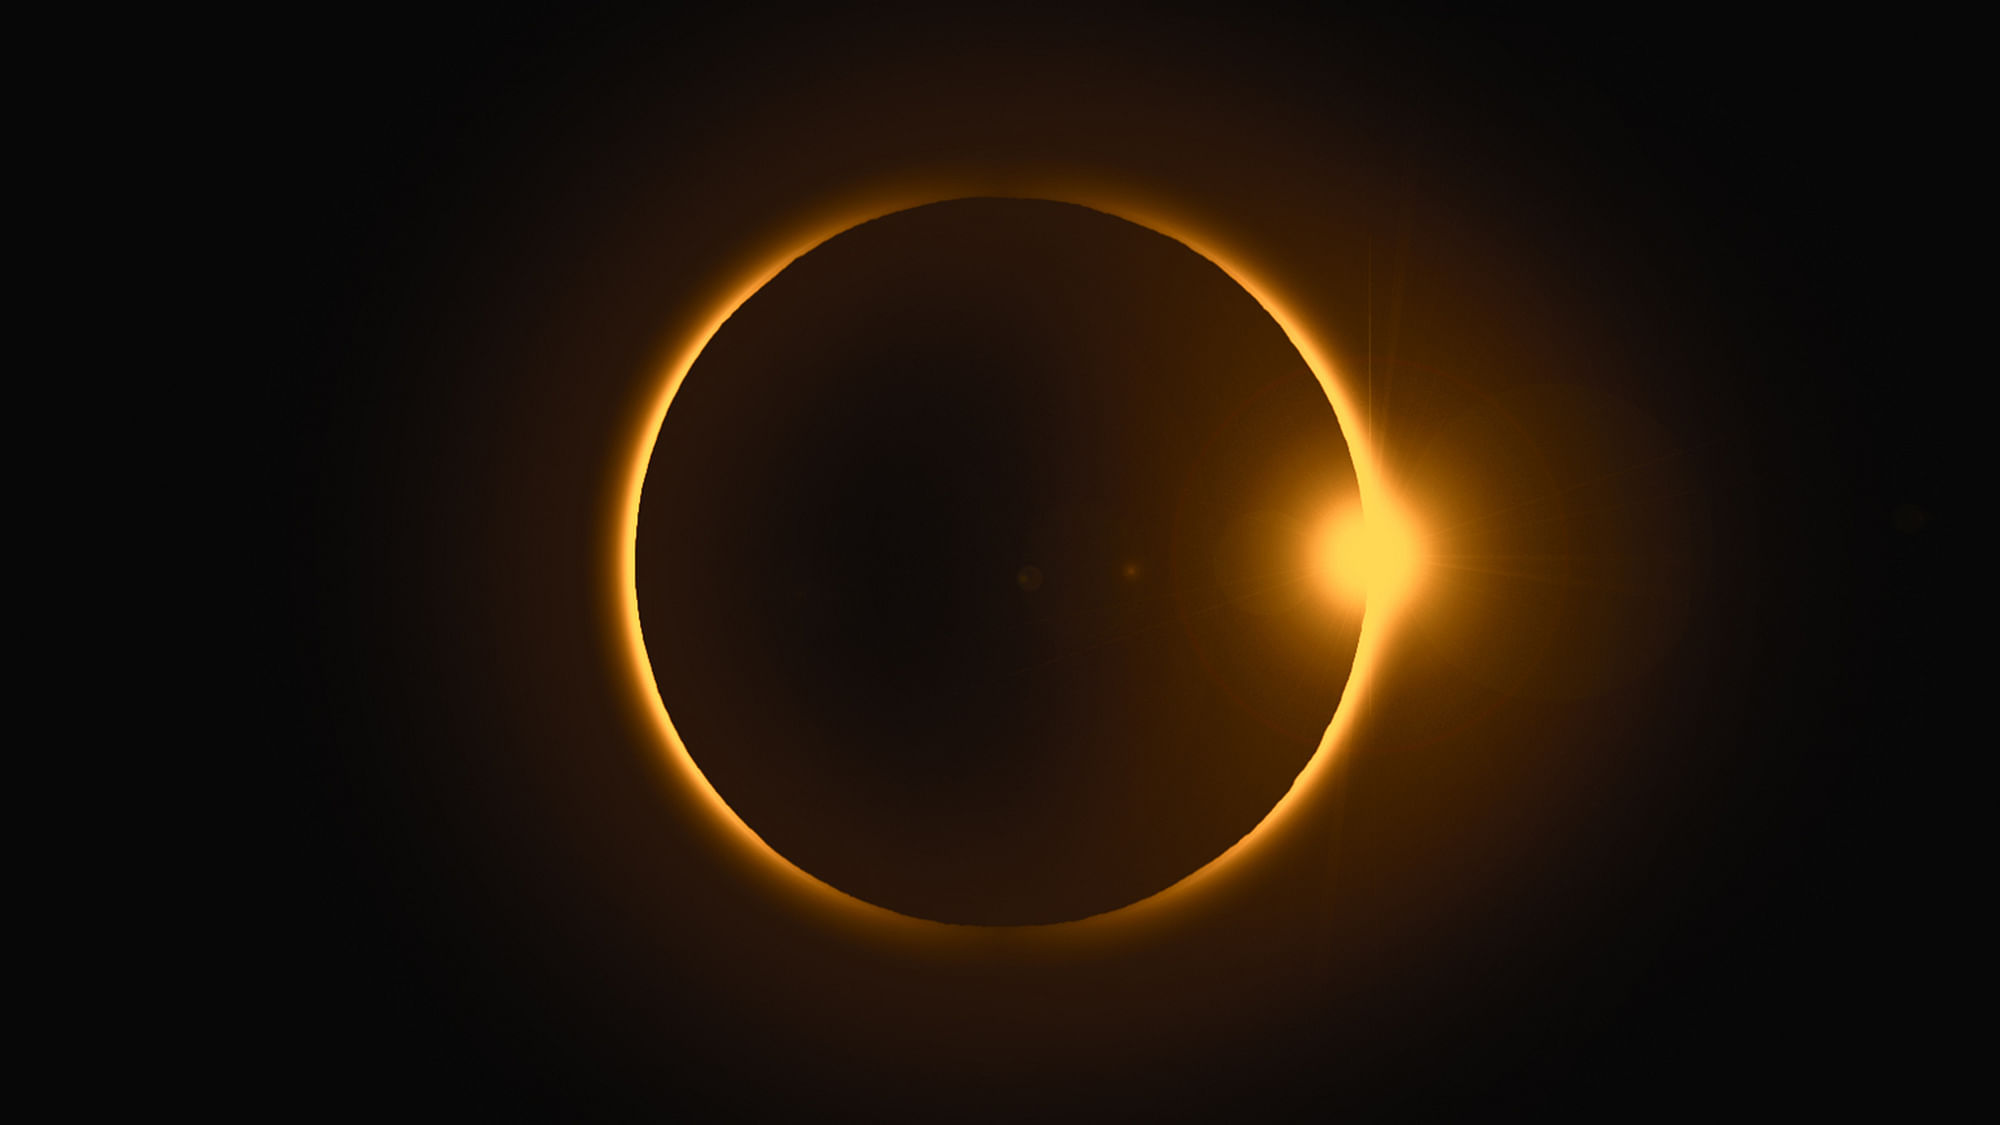 Here are some interesting facts regarding the solar eclipse.